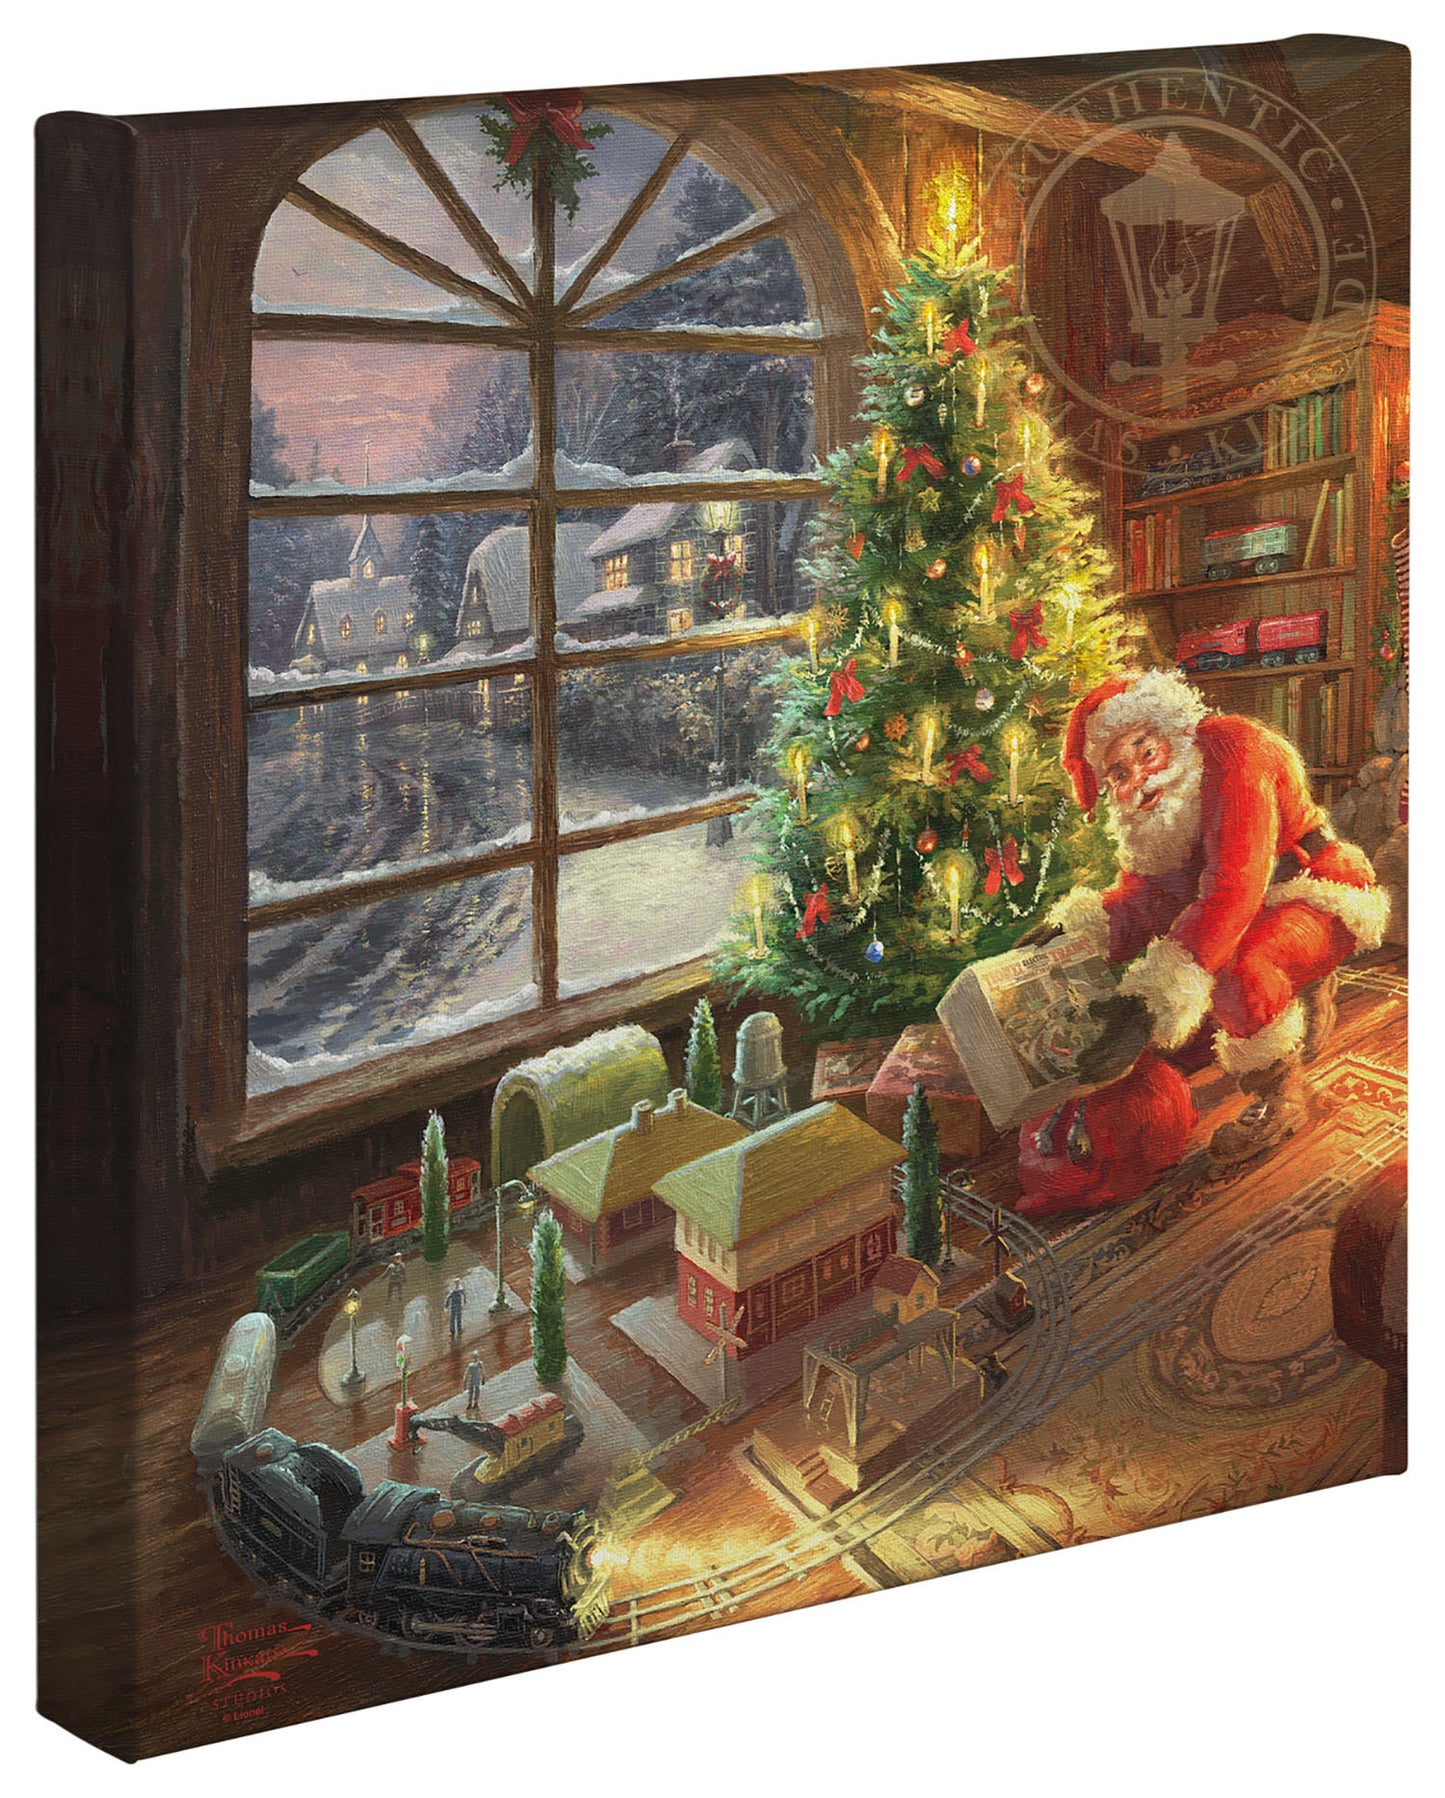 Thomas Kinkade Studios "Santa's Special Delivery" Limited and Open Canvas Giclee